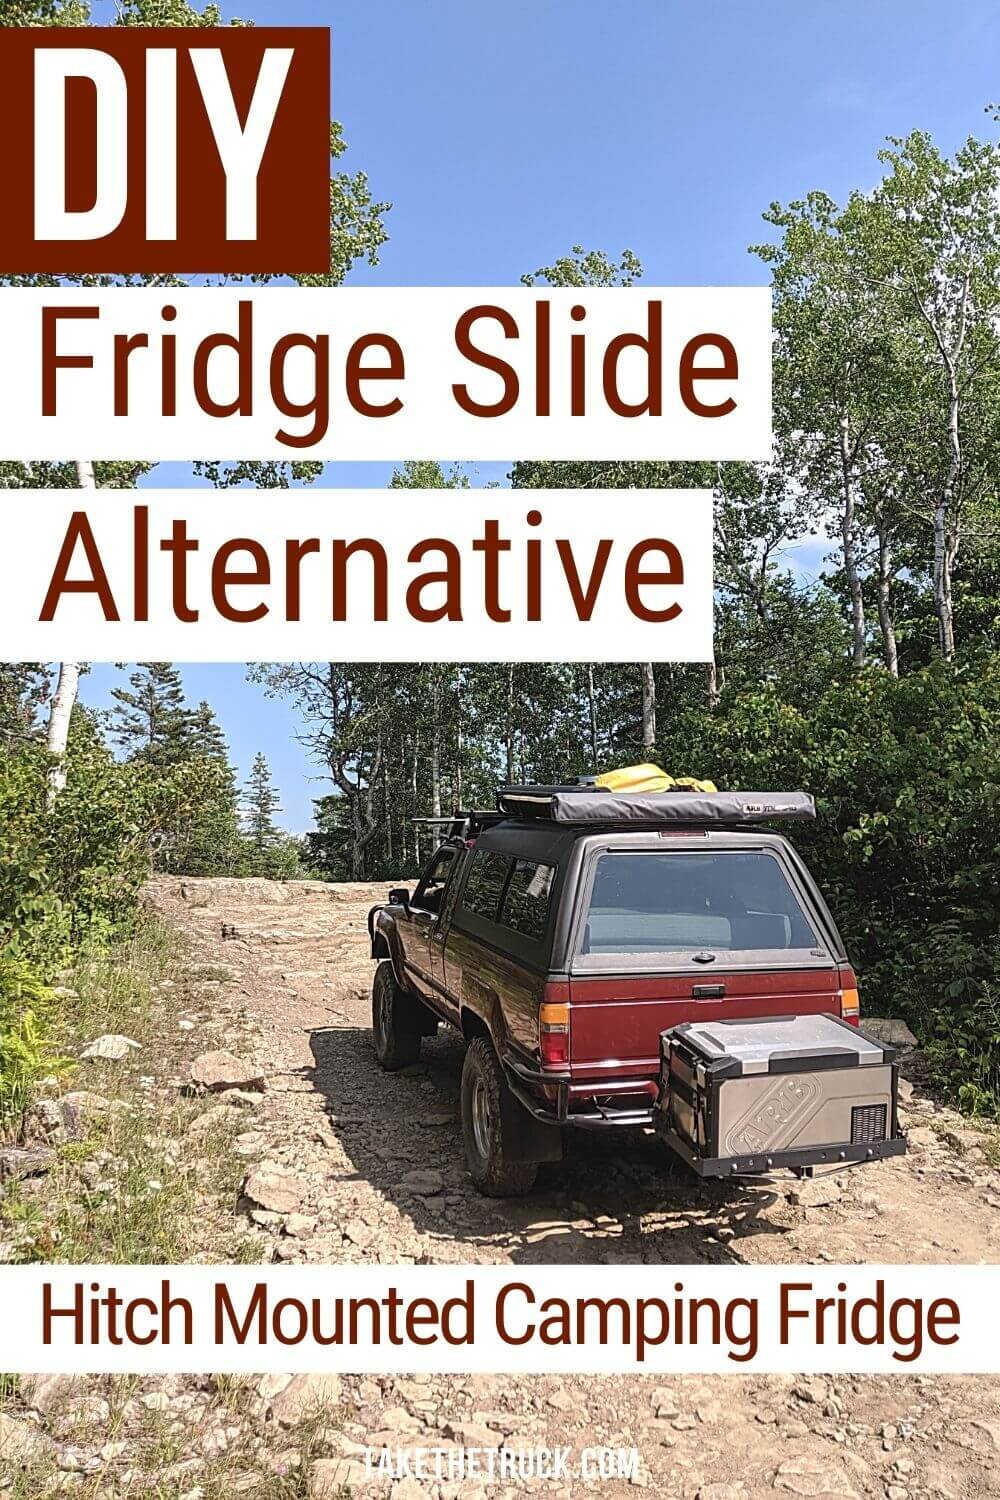 Instead of using a camping fridge slide, check out this DIY camping fridge hack for mounting off your hitch! This works especially well when truck bed camping with an ARB Elements Fridge.